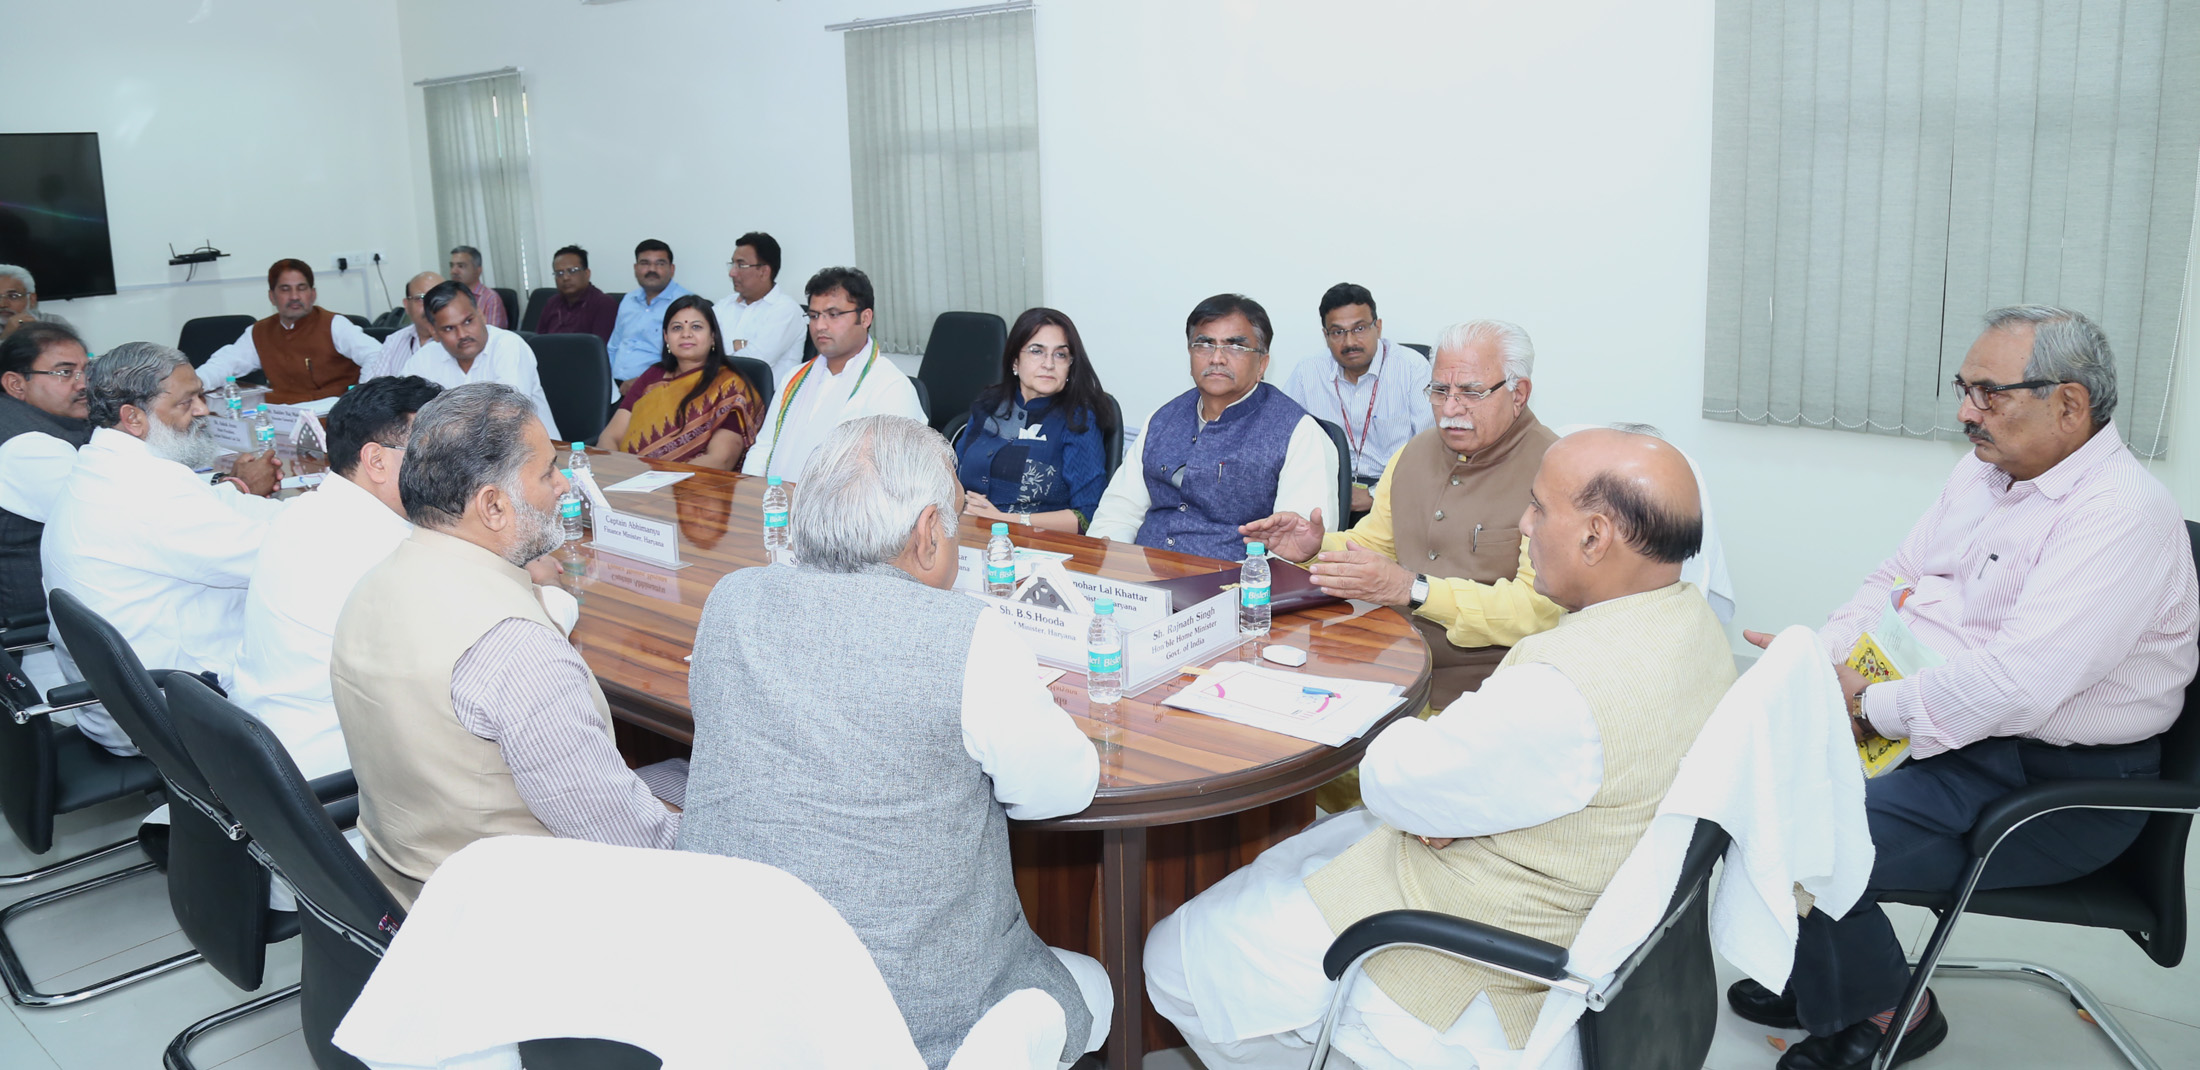 The Union Home Minister, Shri Rajnath Singh chairing an All-Party meeting on Satluj-Yamuna Link Canal issue, in New Delhi on March 24, 2017.  The Union Home Secretary, Shri Rajiv Mehrishi is also seen.